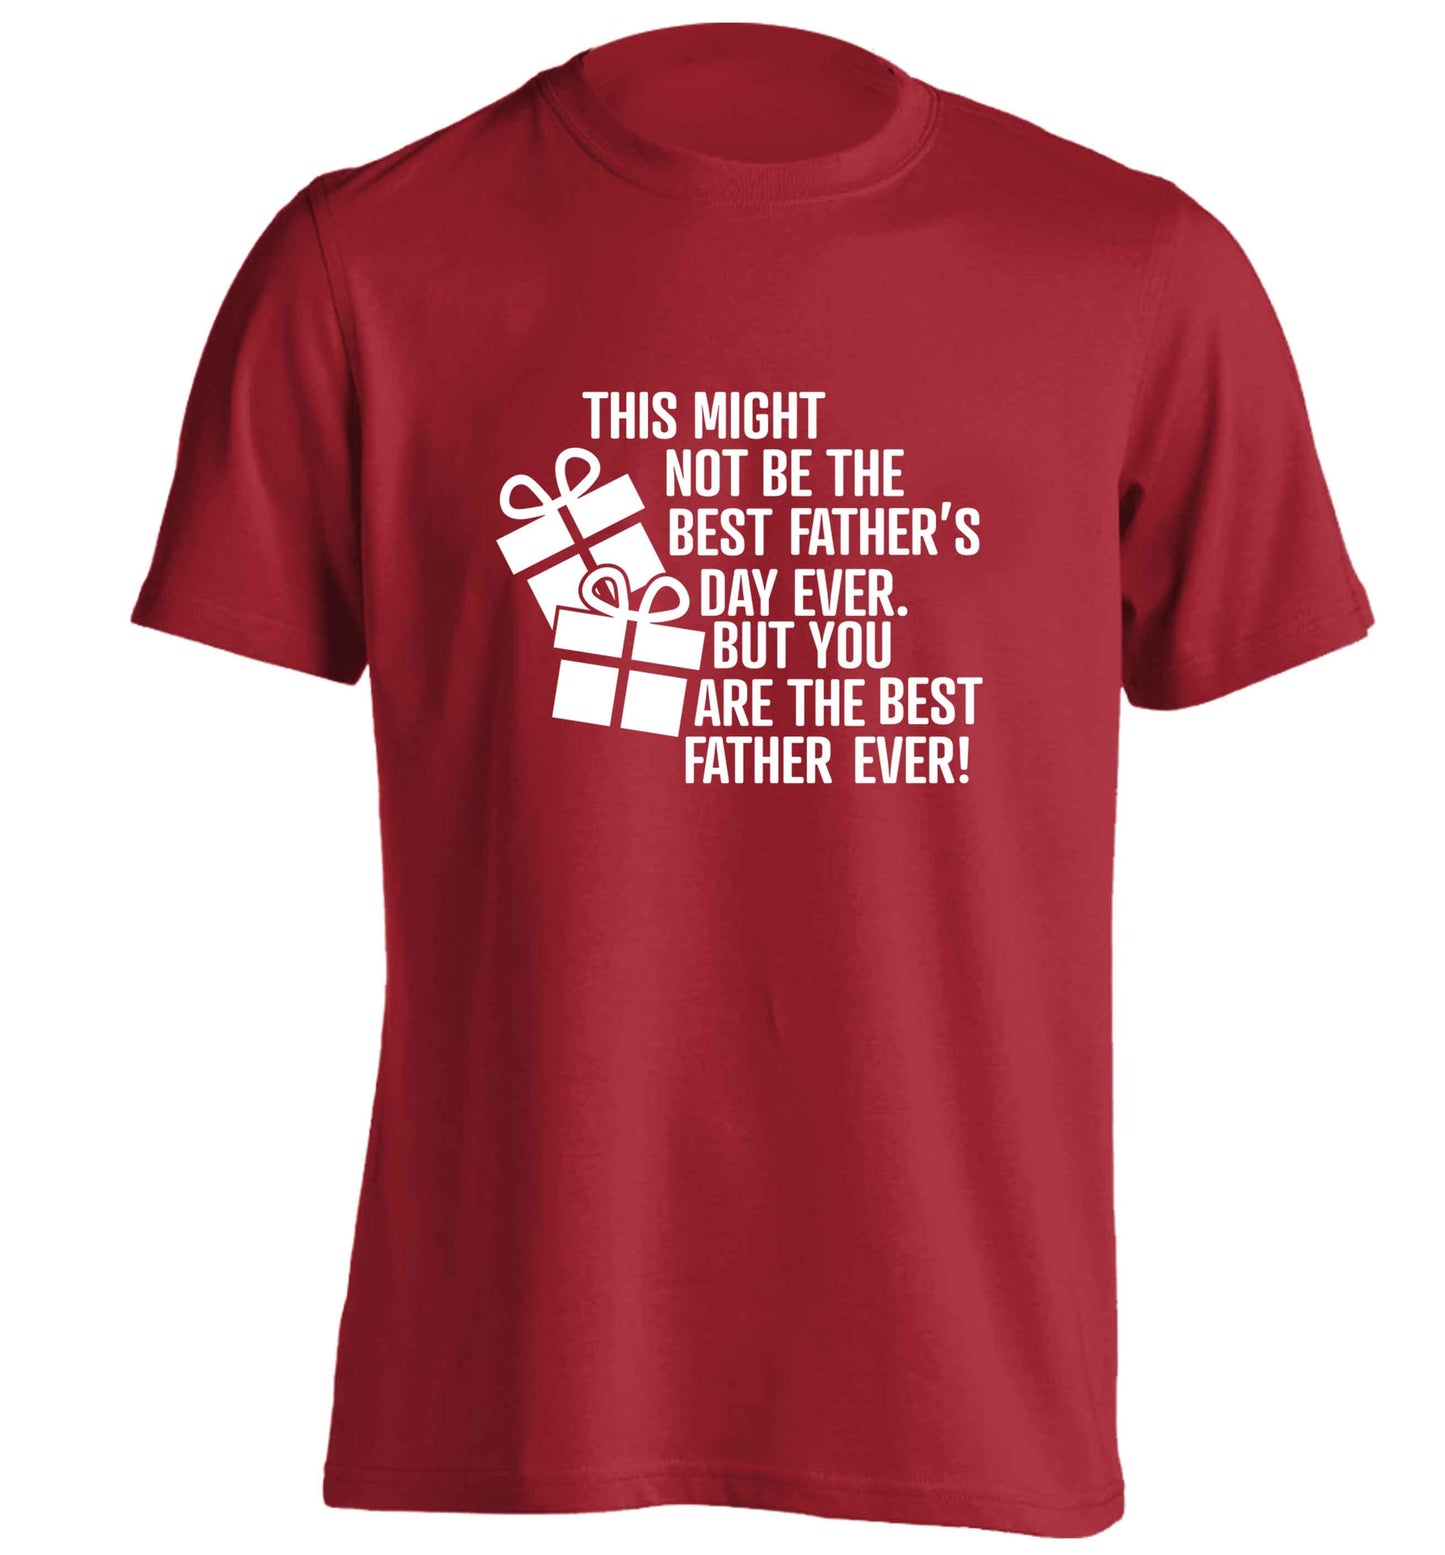 It might not be the best Father's Day ever but you are the best father ever! adults unisex red Tshirt 2XL